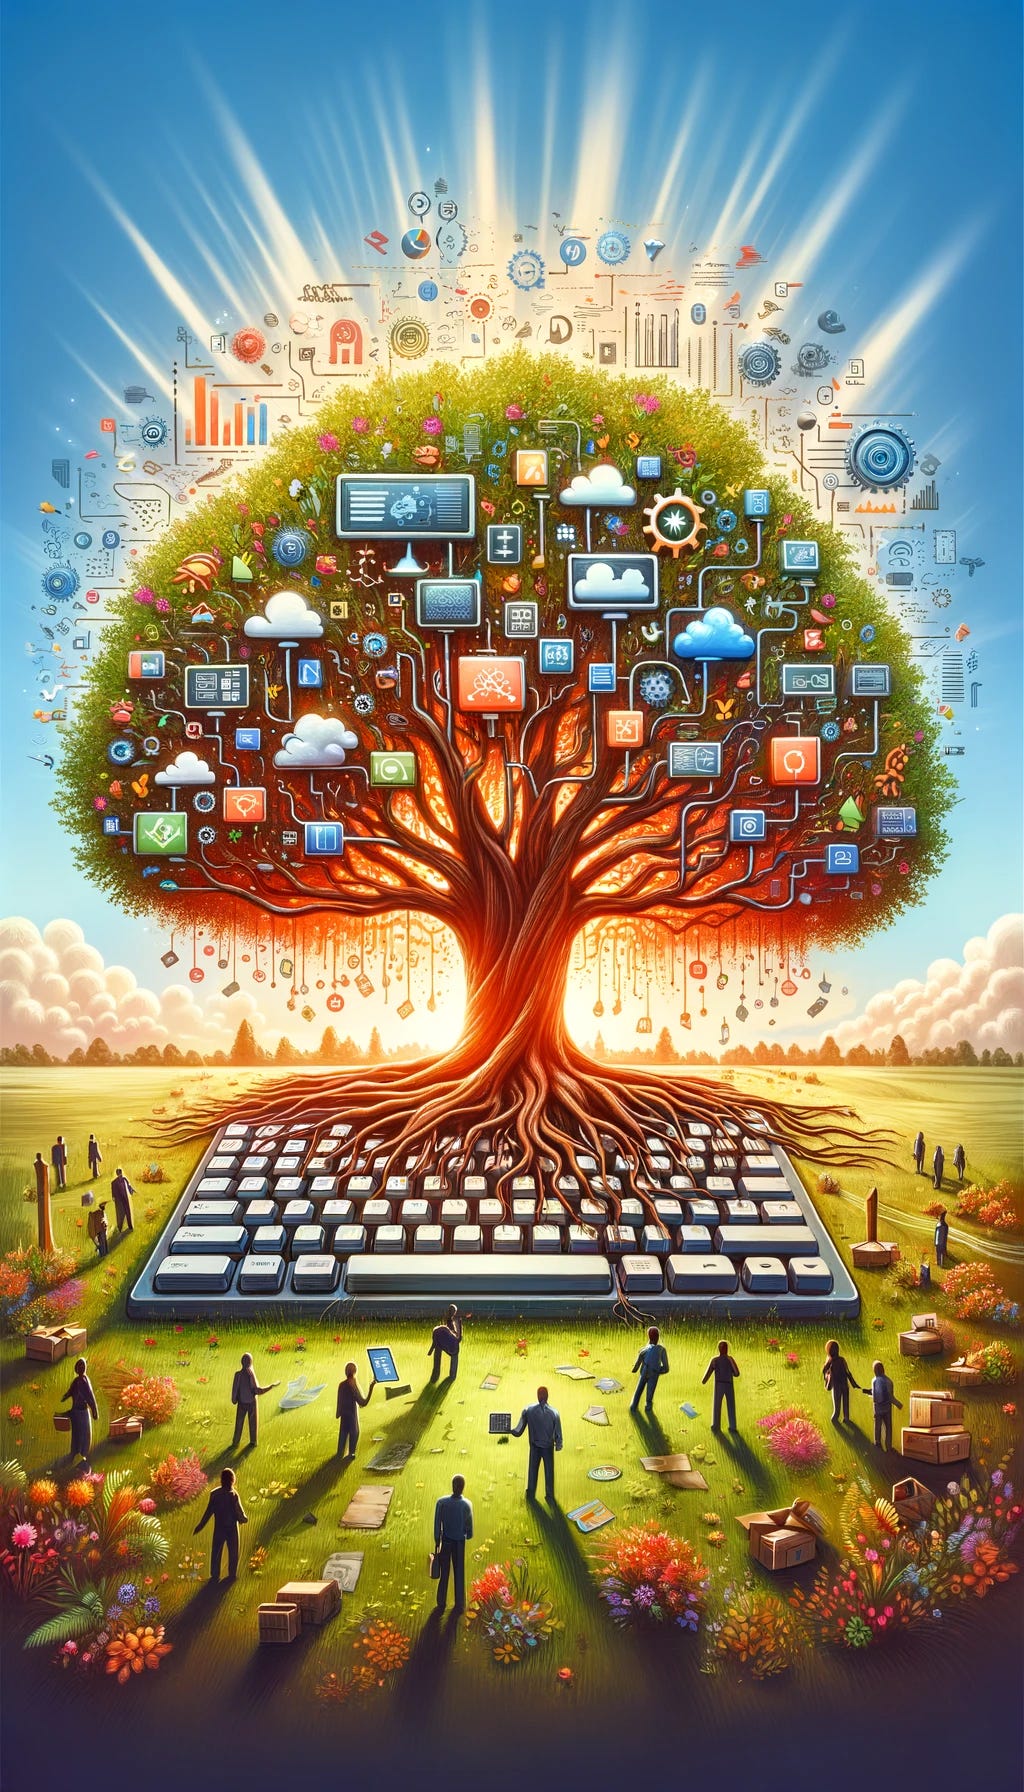 Imagine a vivid illustration that symbolizes a vertical SaaS (Software as a Service) platform experiencing rapid growth. Visualize this concept as a giant, flourishing tree rooted in a computer keyboard, stretching upwards. Its branches are teeming with various technological icons, such as cloud symbols, gears, and data charts, representing different features and services offered by the platform. The tree is surrounded by small figures of people, representing users, who are interacting with the branches, indicating engagement and adoption. The setting is outdoors, with a clear sky in the background, symbolizing optimism and endless possibilities. This scene captures the dynamic and expansive nature of a vertical SaaS platform's growth.